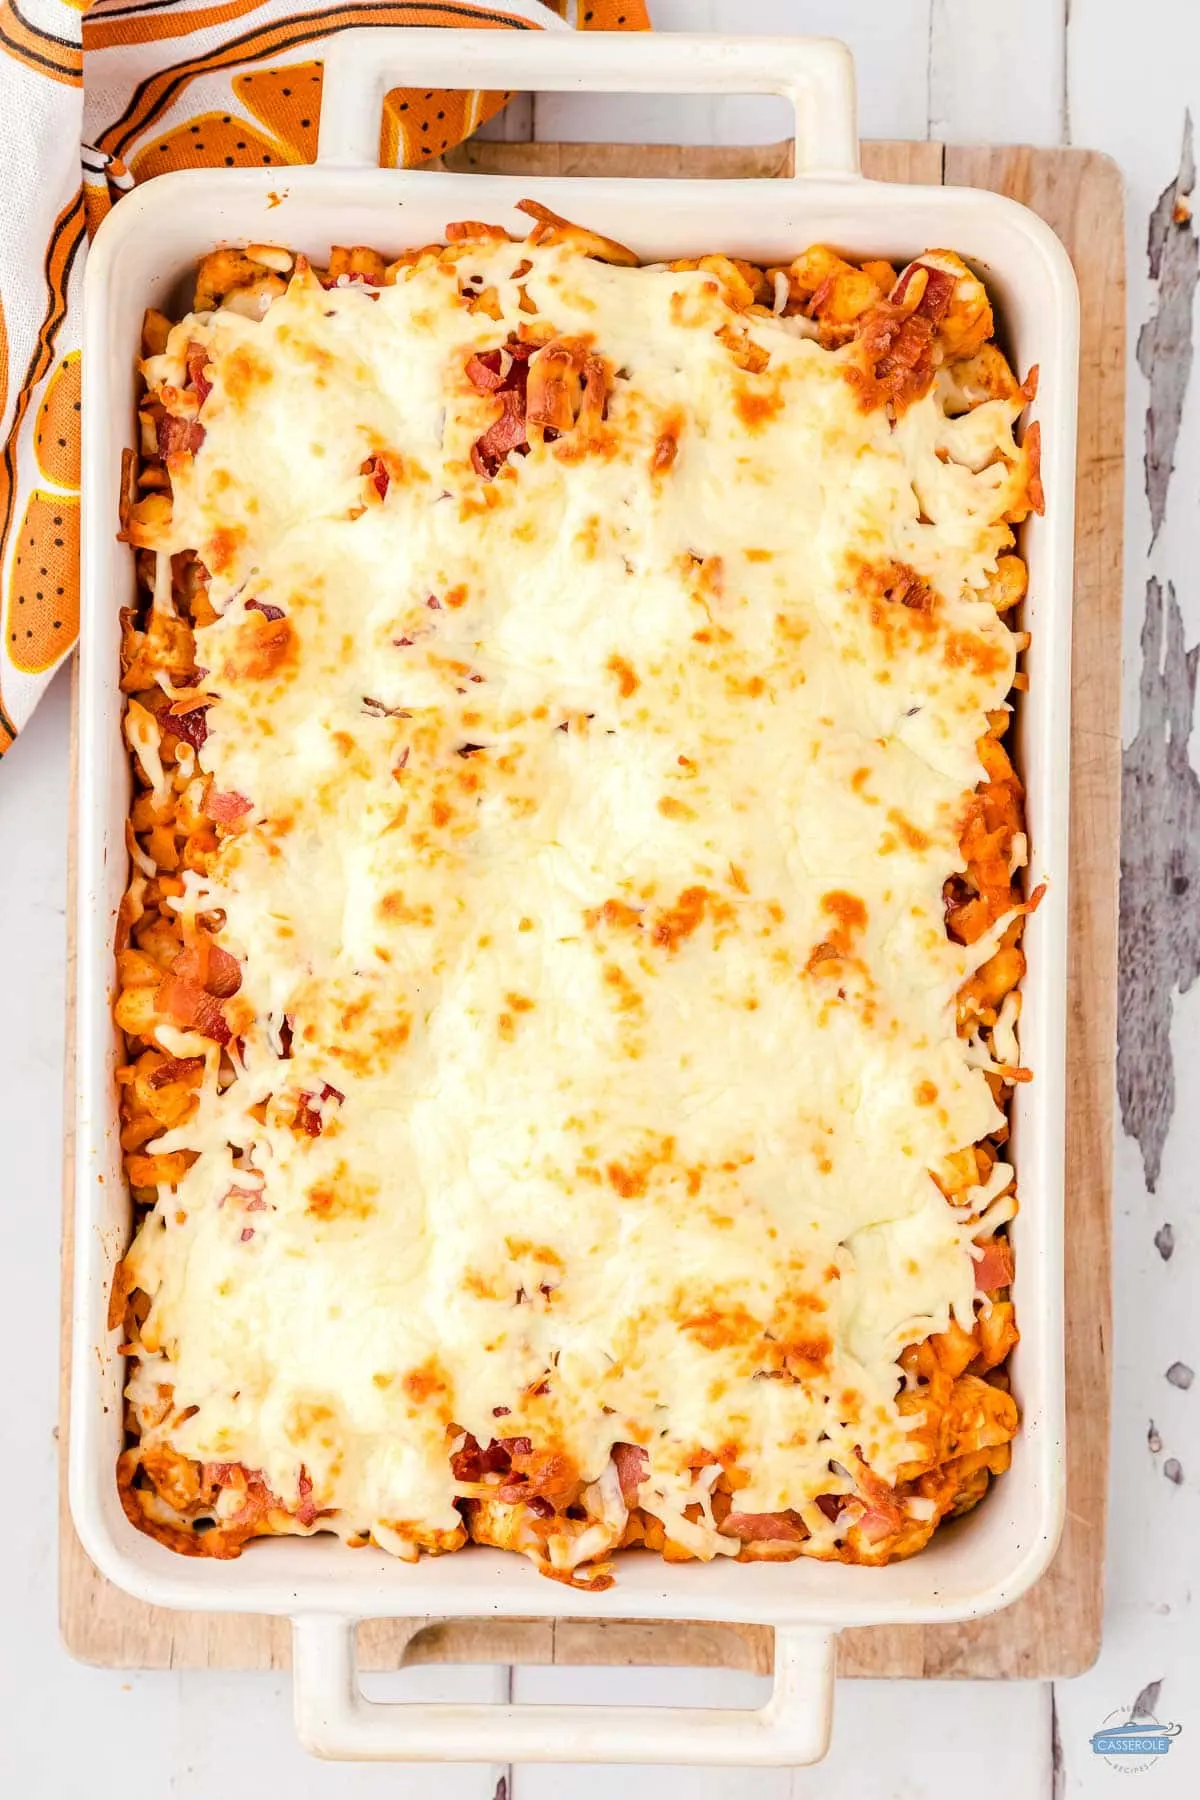 baked casserole is a delicious meal for a busy single working mom.